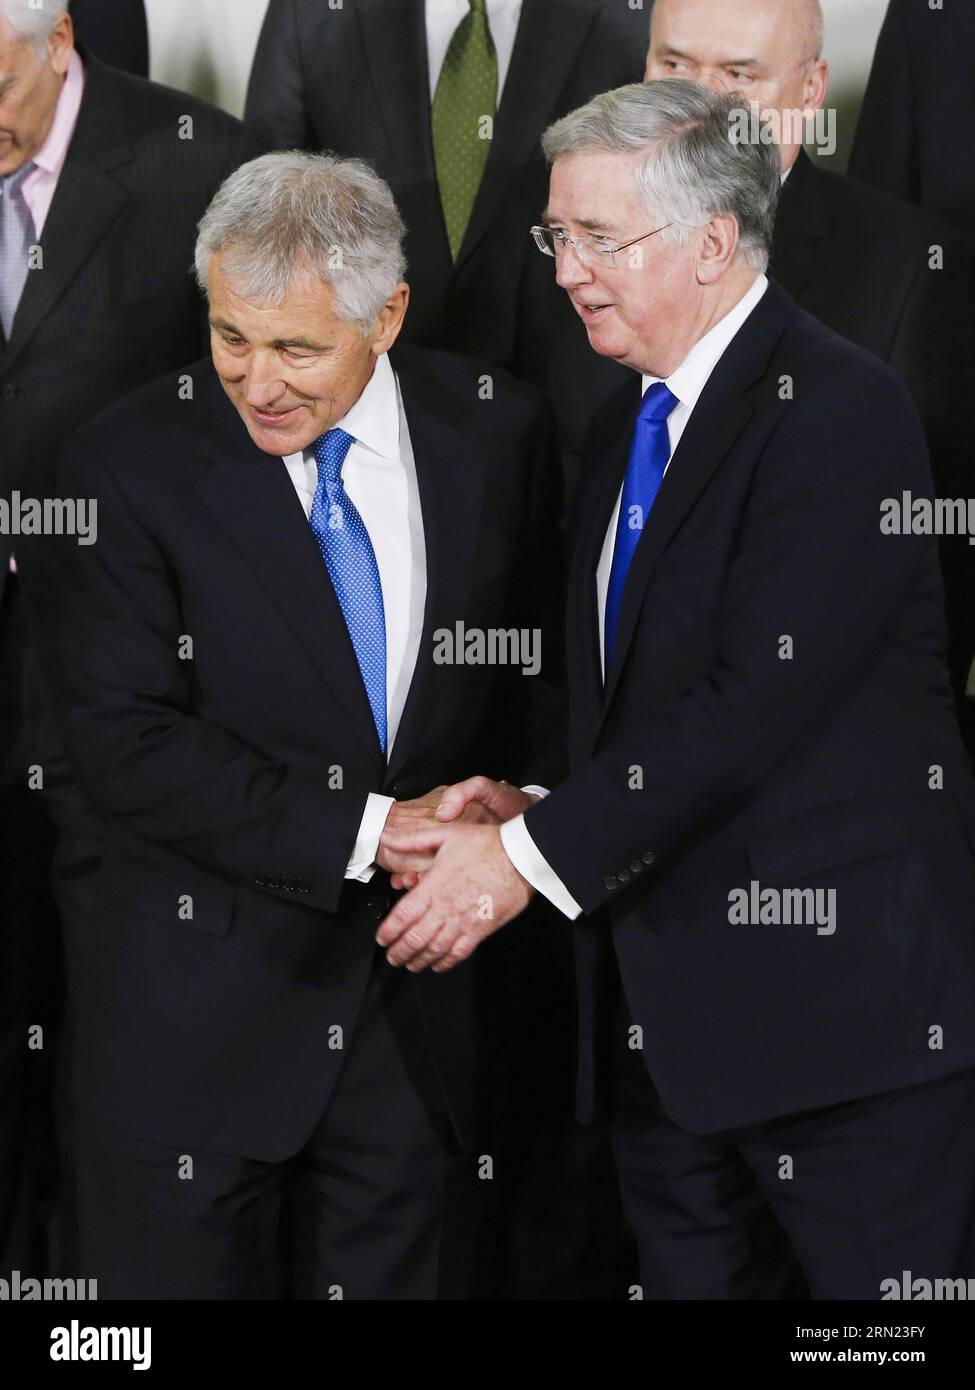 (150205) -- BRUSSELS, Feb. 5, 2015 -- British Defense Secretary Michael Fallon (R) shakes hands with his U.S. counterpart Chuck Hagel while posing for a family photo before the NATO defense ministers meeting at the Alliance headquarters in Brussels, capital of Belgium, Feb. 5, 2014. NATO Defense Ministers gathered here on Thursday to discuss the implementation of the Readiness Action Plan and the Ukraine crisis. Zhou Lei) BELGIUM-NATO-DEFENSE MINISTER-MEETING ?? PUBLICATIONxNOTxINxCHN   Brussels Feb 5 2015 British Defense Secretary Michael Fallon r Shakes Hands With His U S Part Chuck Hagel wh Stock Photo